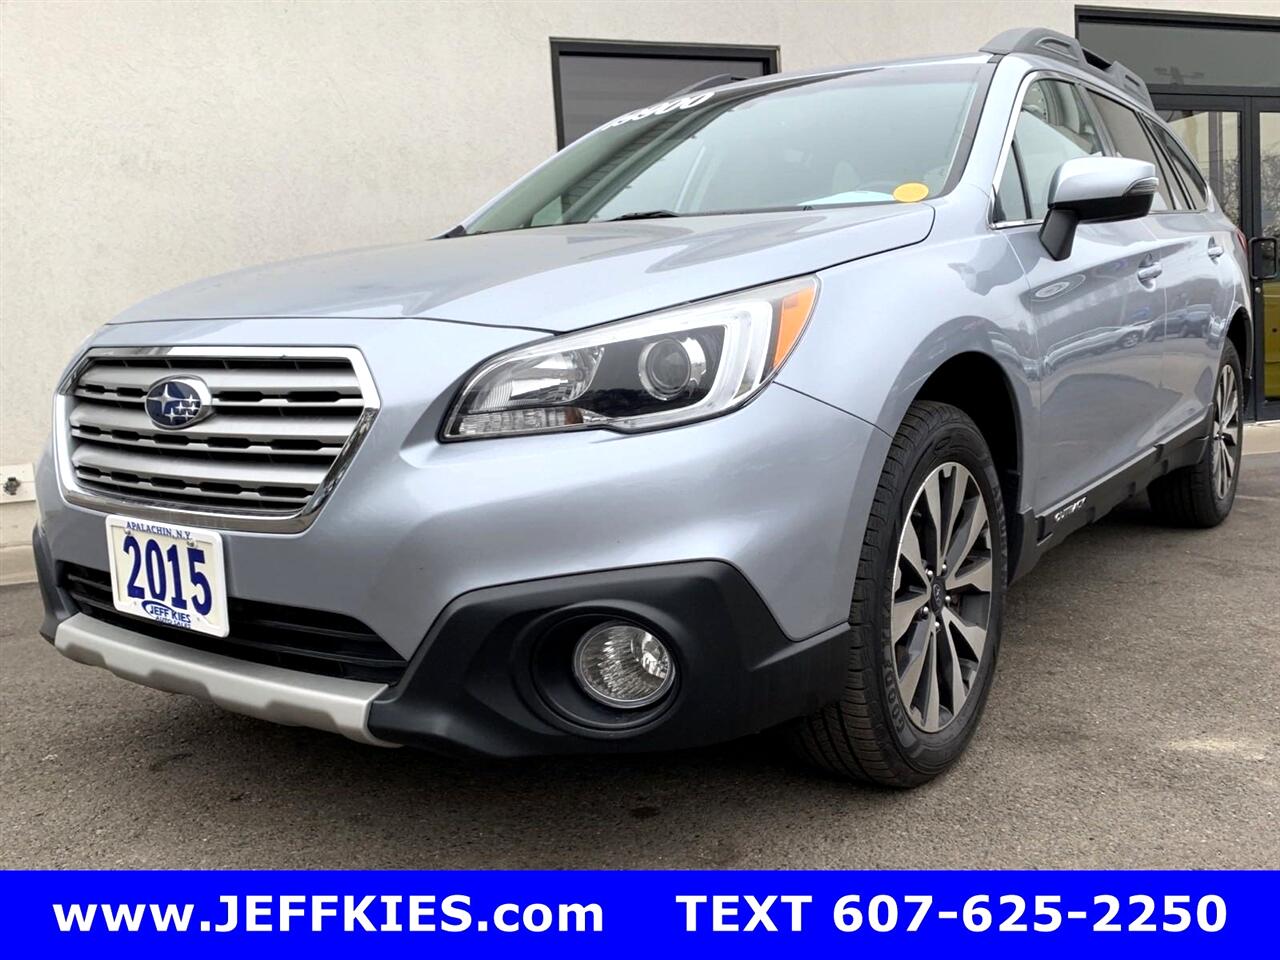 Subaru Outback 4dr Wgn 3.6R Limited 2015